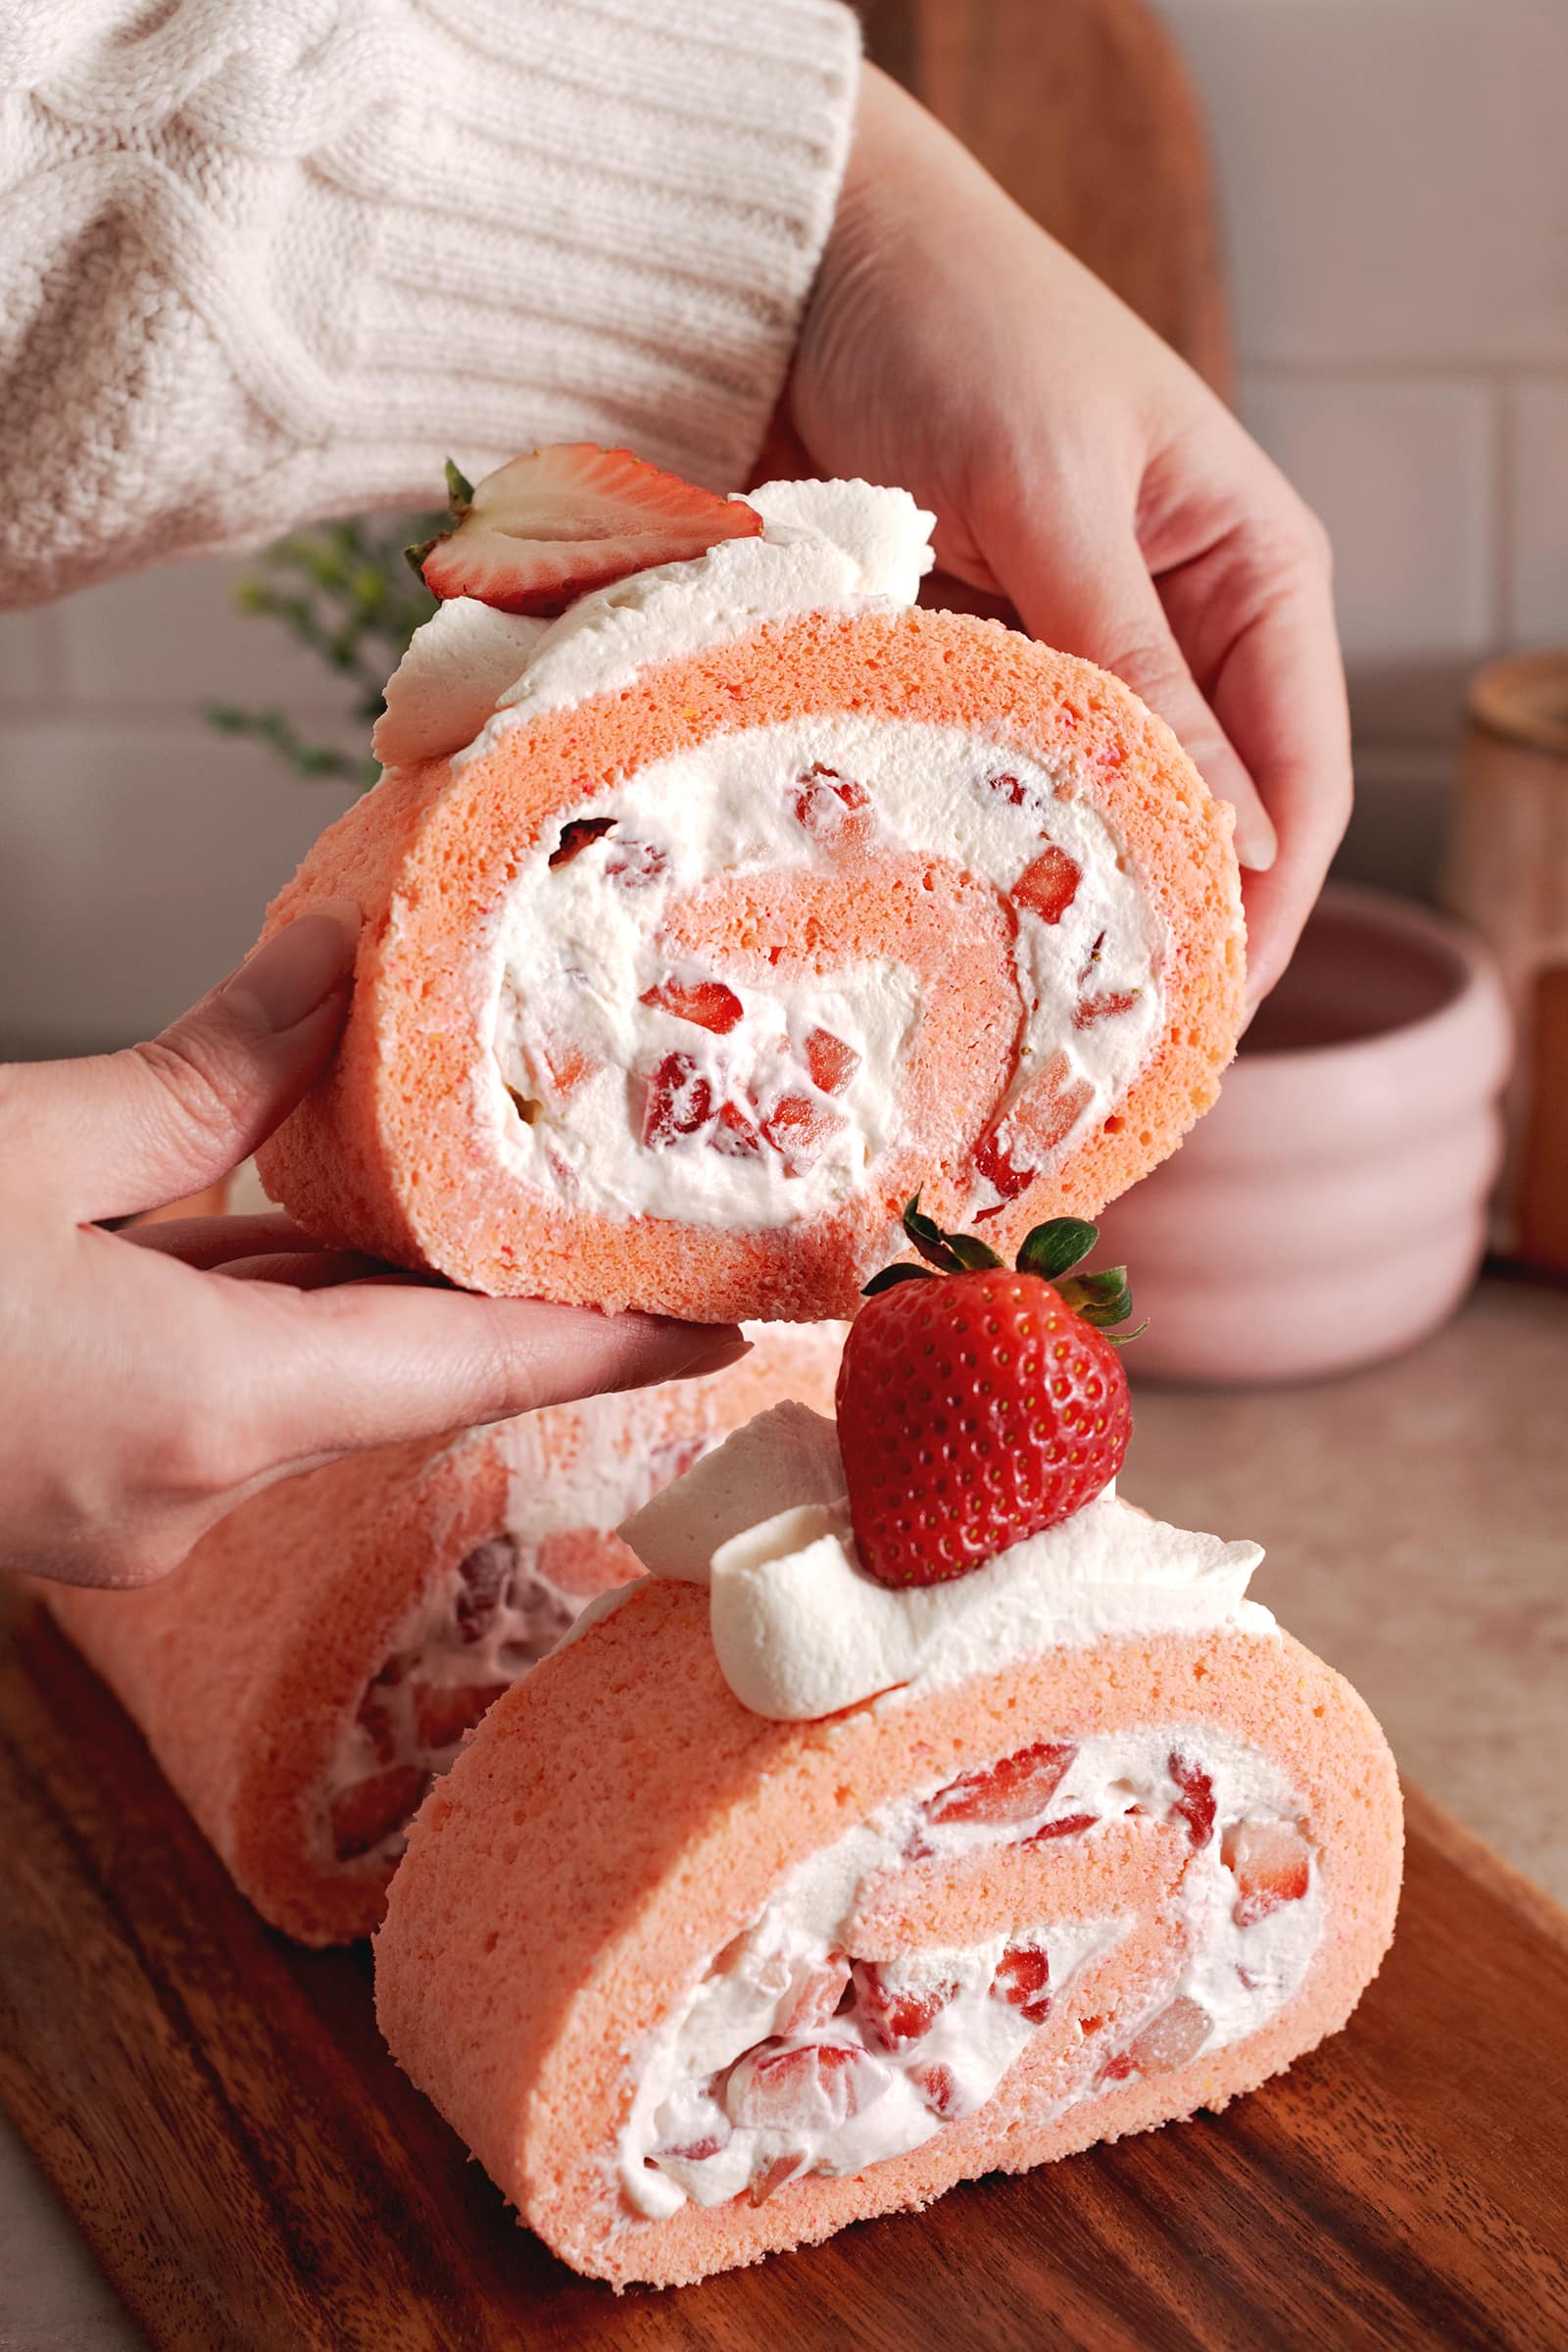 Hands lifting a slice of strawberry roll cake above the rest of the slices.